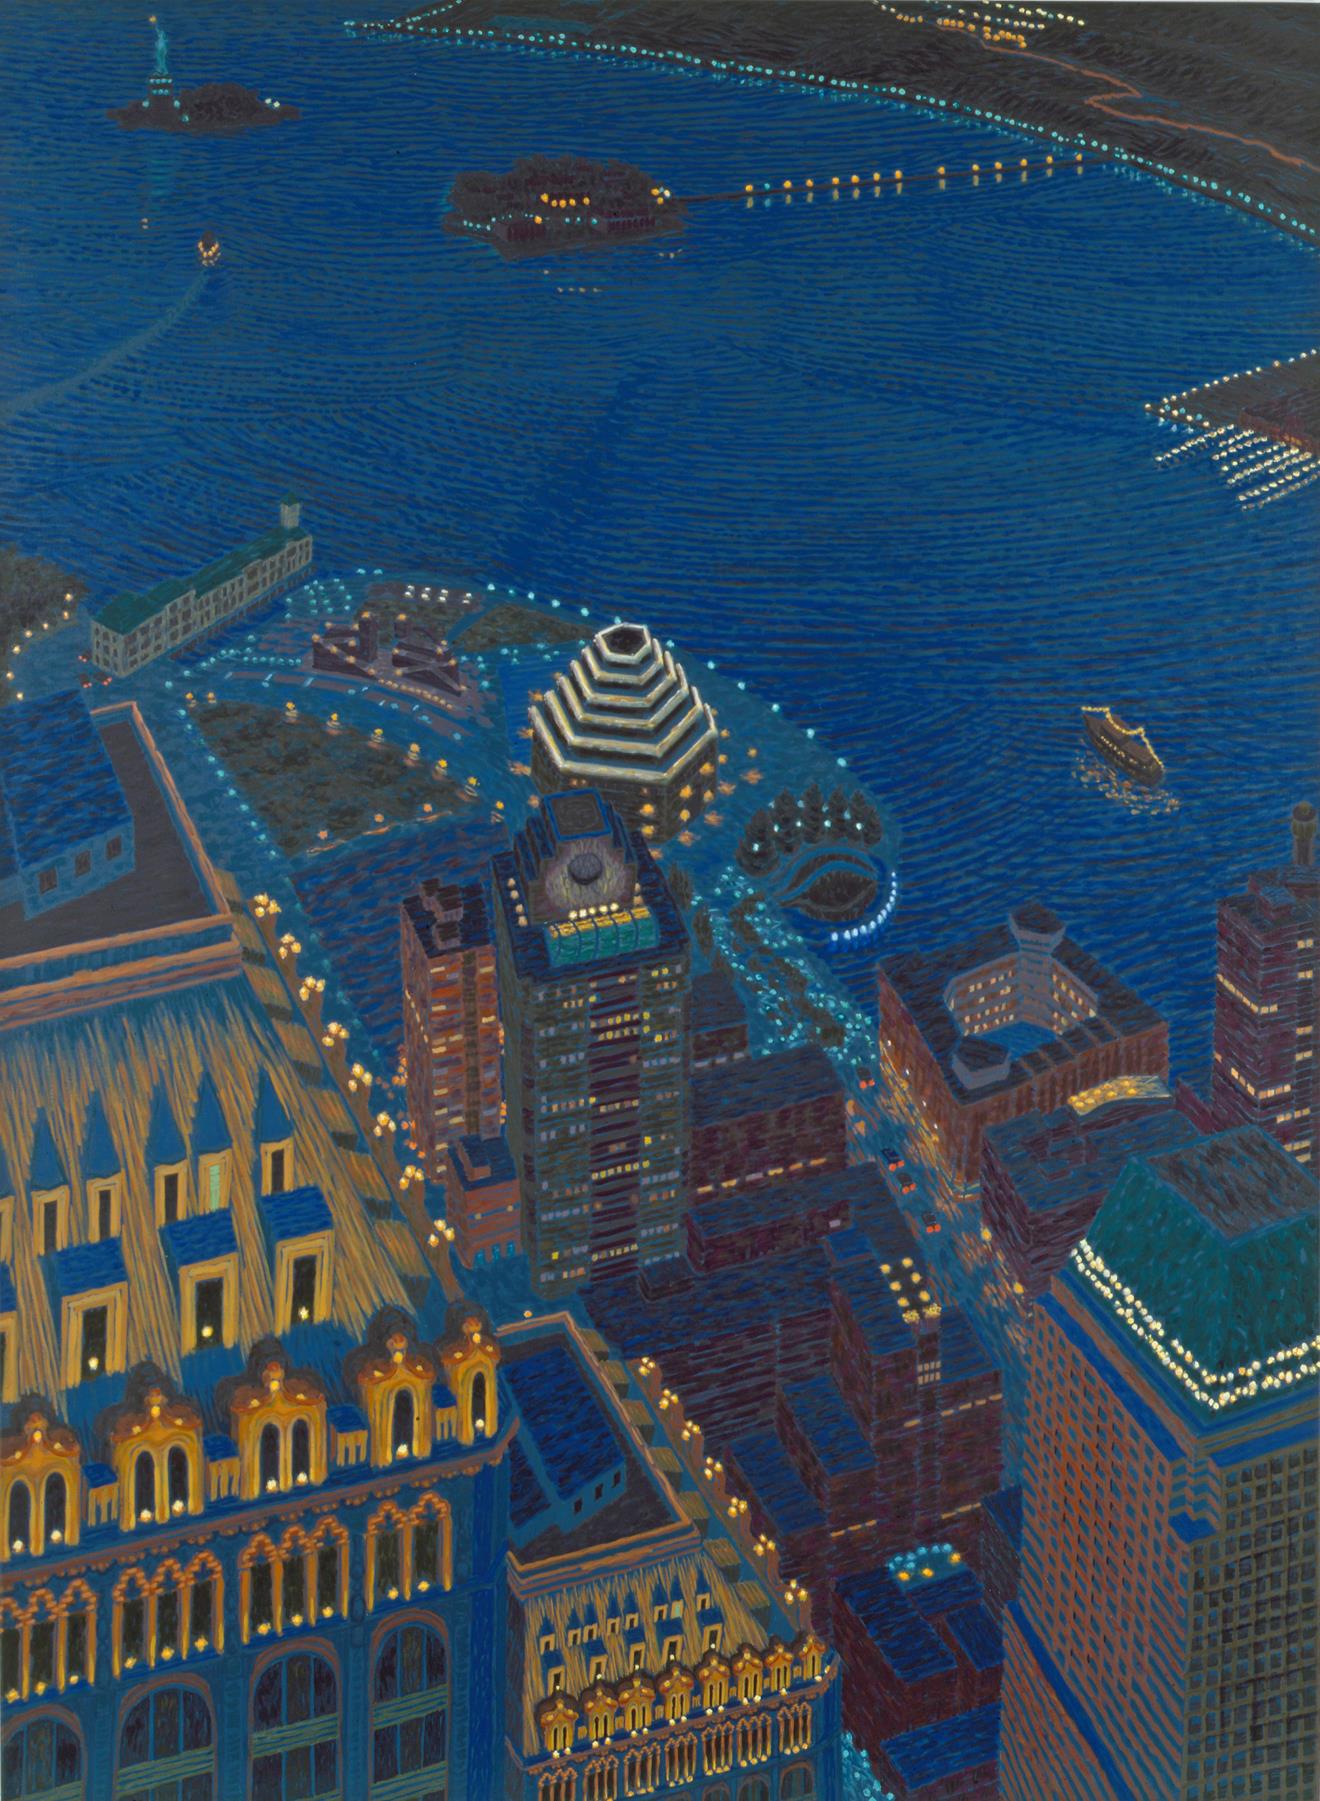 Yvonne Jacquette, "Mixed Heights and Harbor From World Trade Center," 1998. Oil on linen, 79 1/4 x 58 3/8 inches.